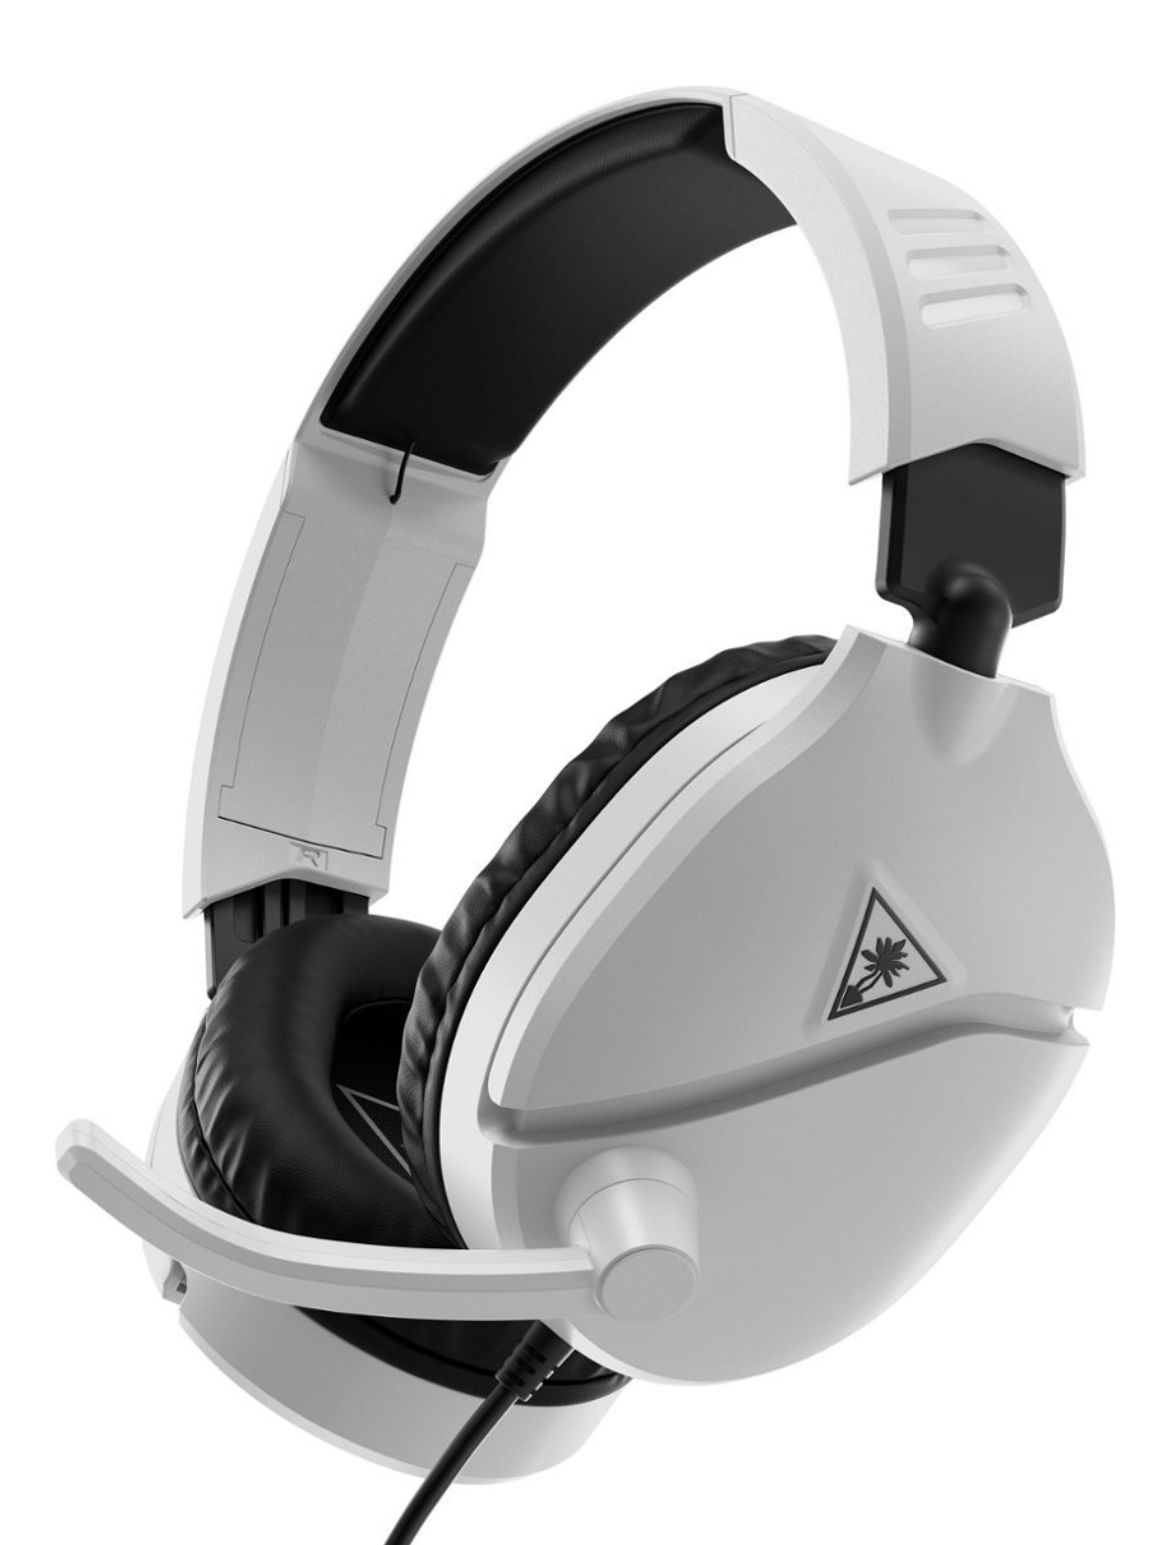 BRAND NEW IN BOX: Turtle Beach Recon 70 Video Game Headset for Xbox, Play Station, PSP, Switch, PC